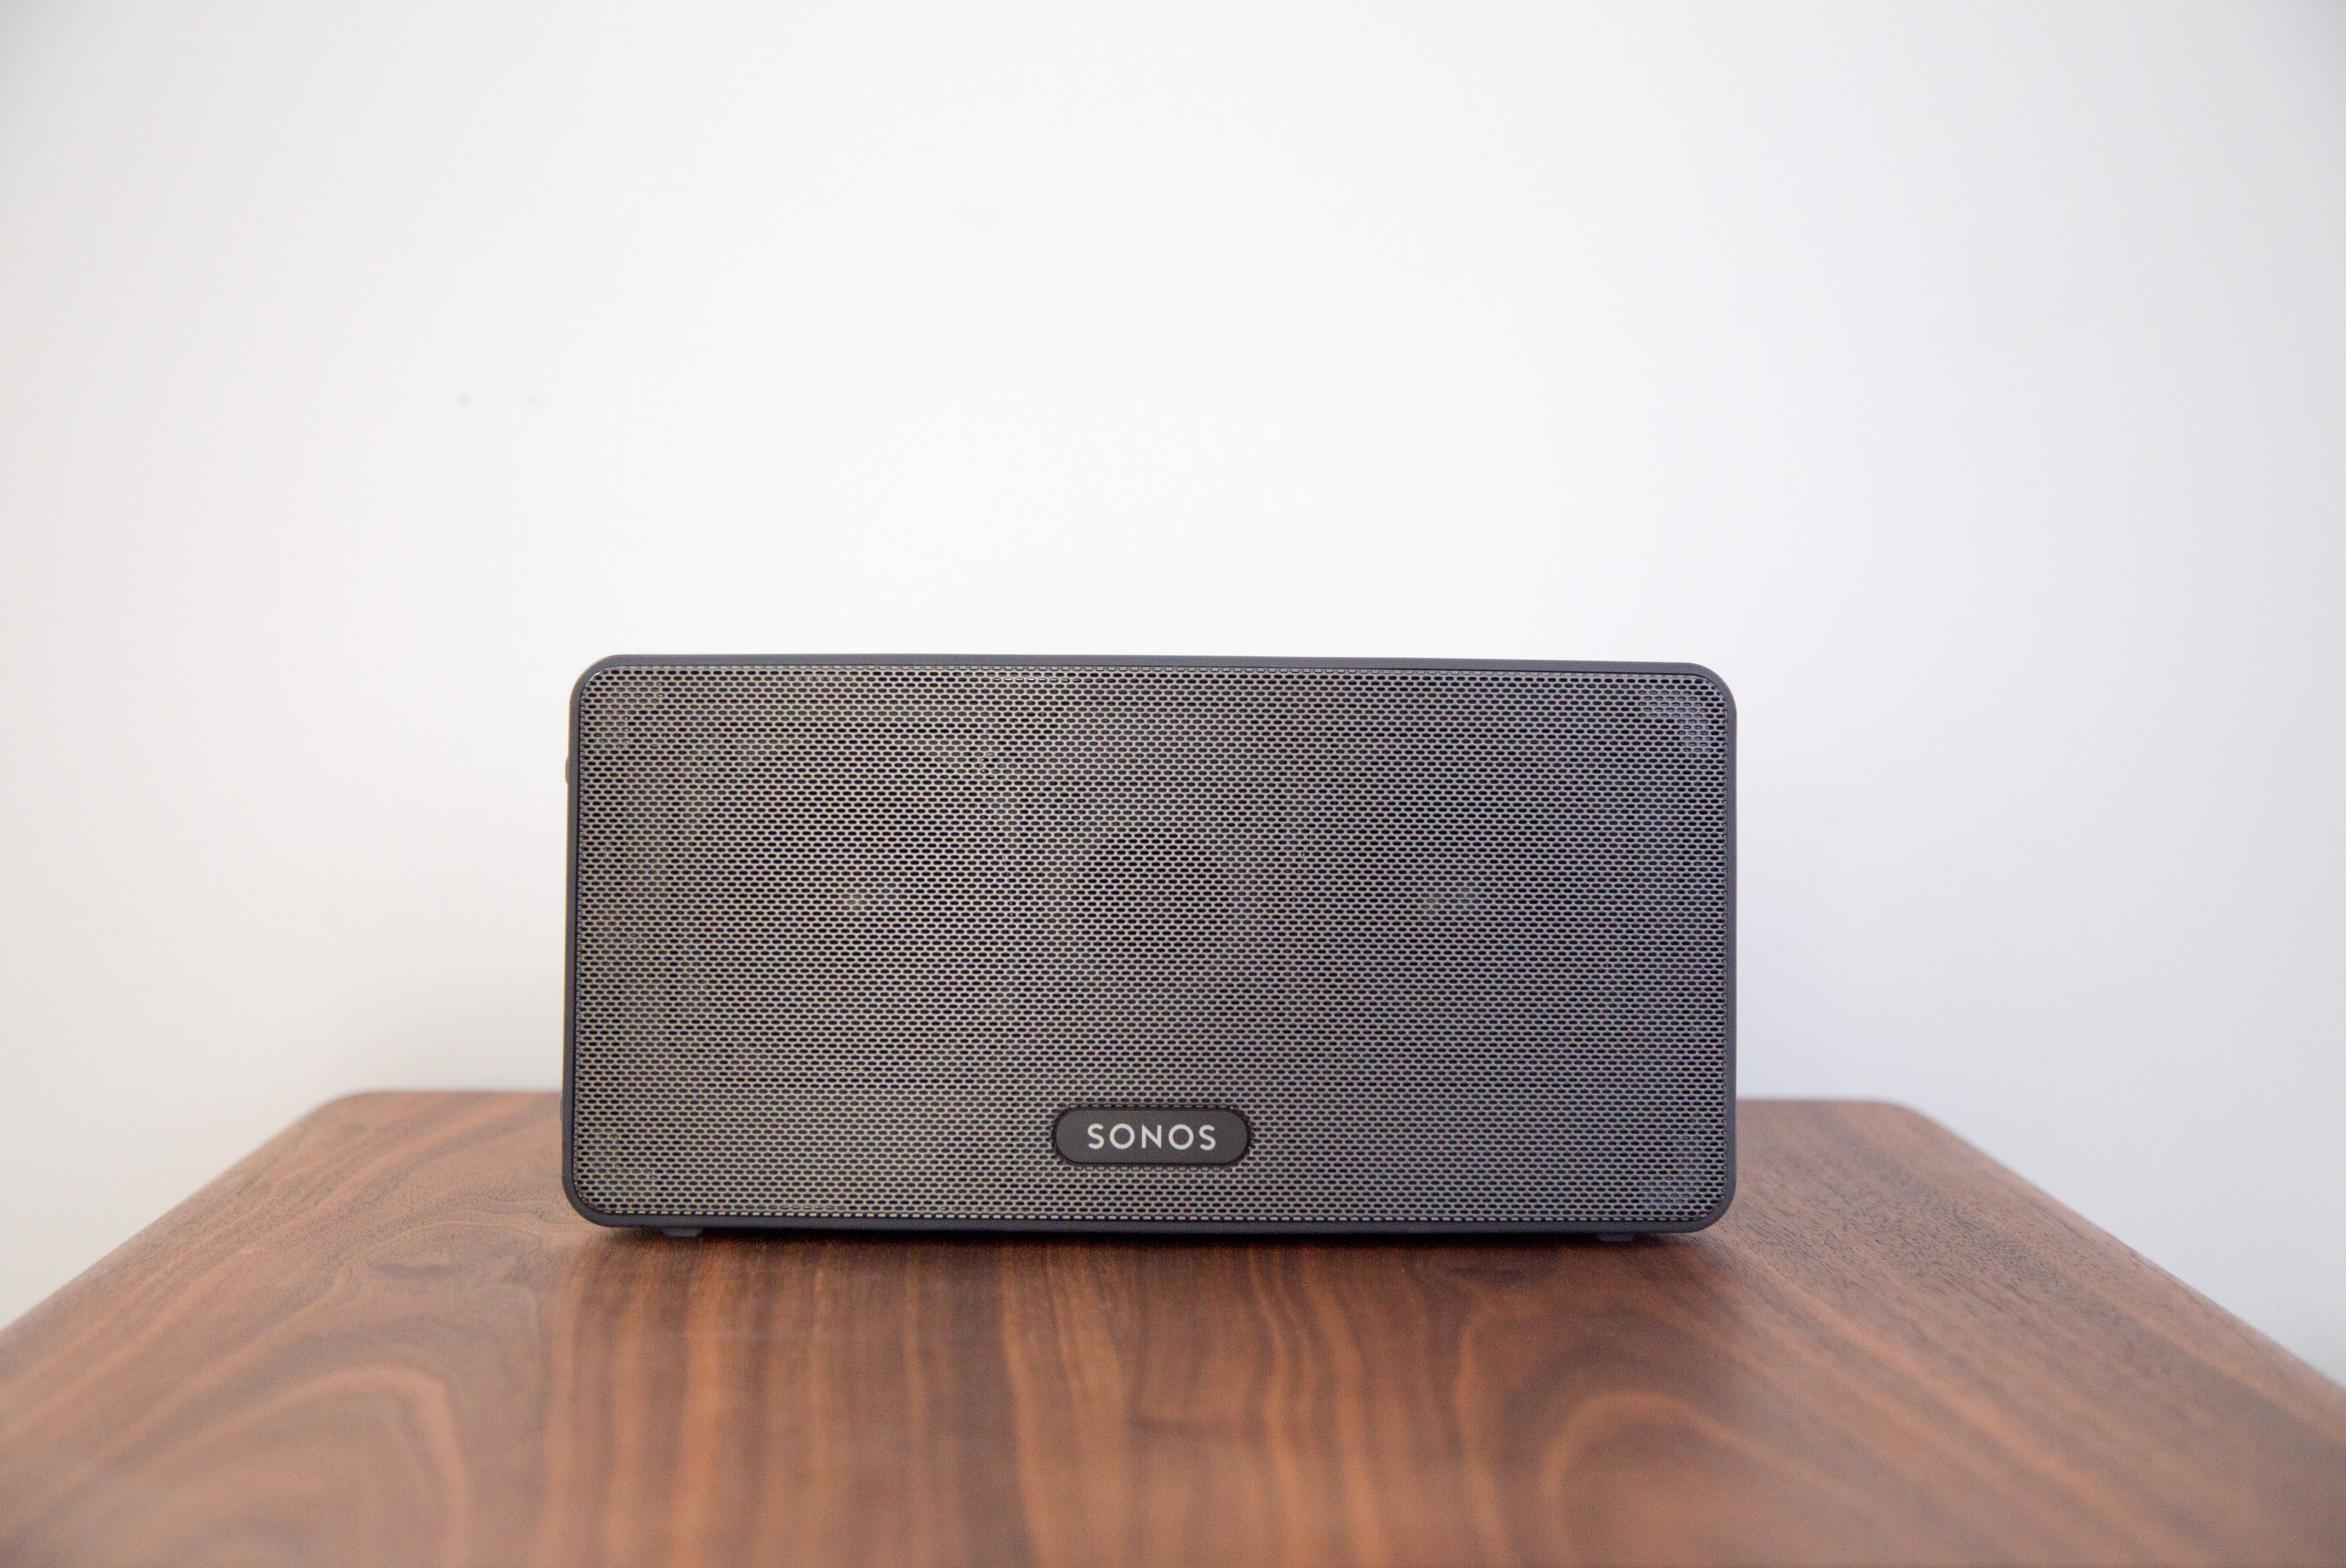 Sonos clarifies how unsupported will be treated TechCrunch